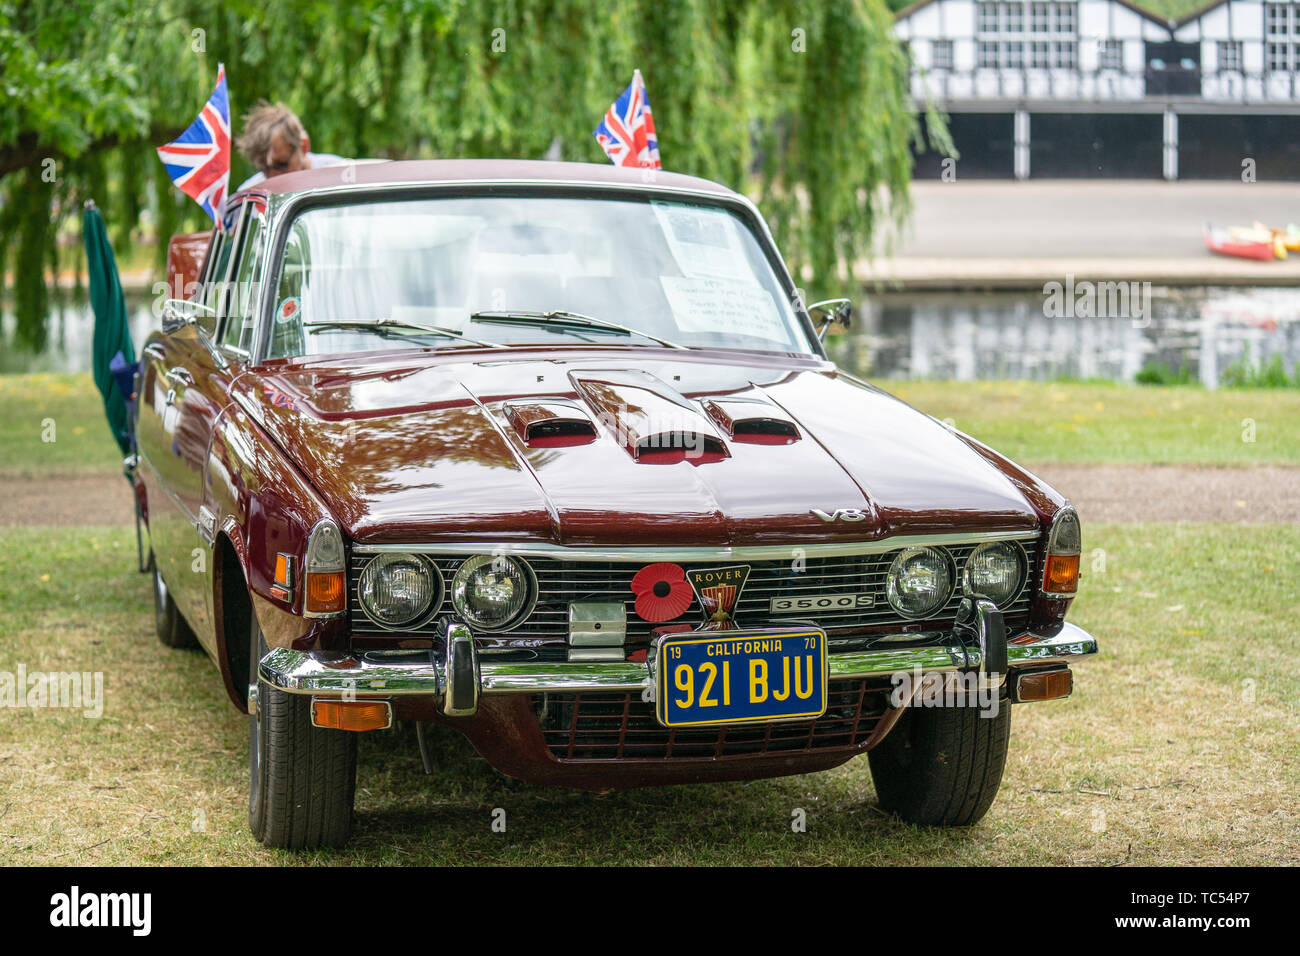 Bedford, Bedfordshire, UK. June 2, 2019.The Rover P6 series or 3500 s. Also called Rover V8 Sport Stock Photo